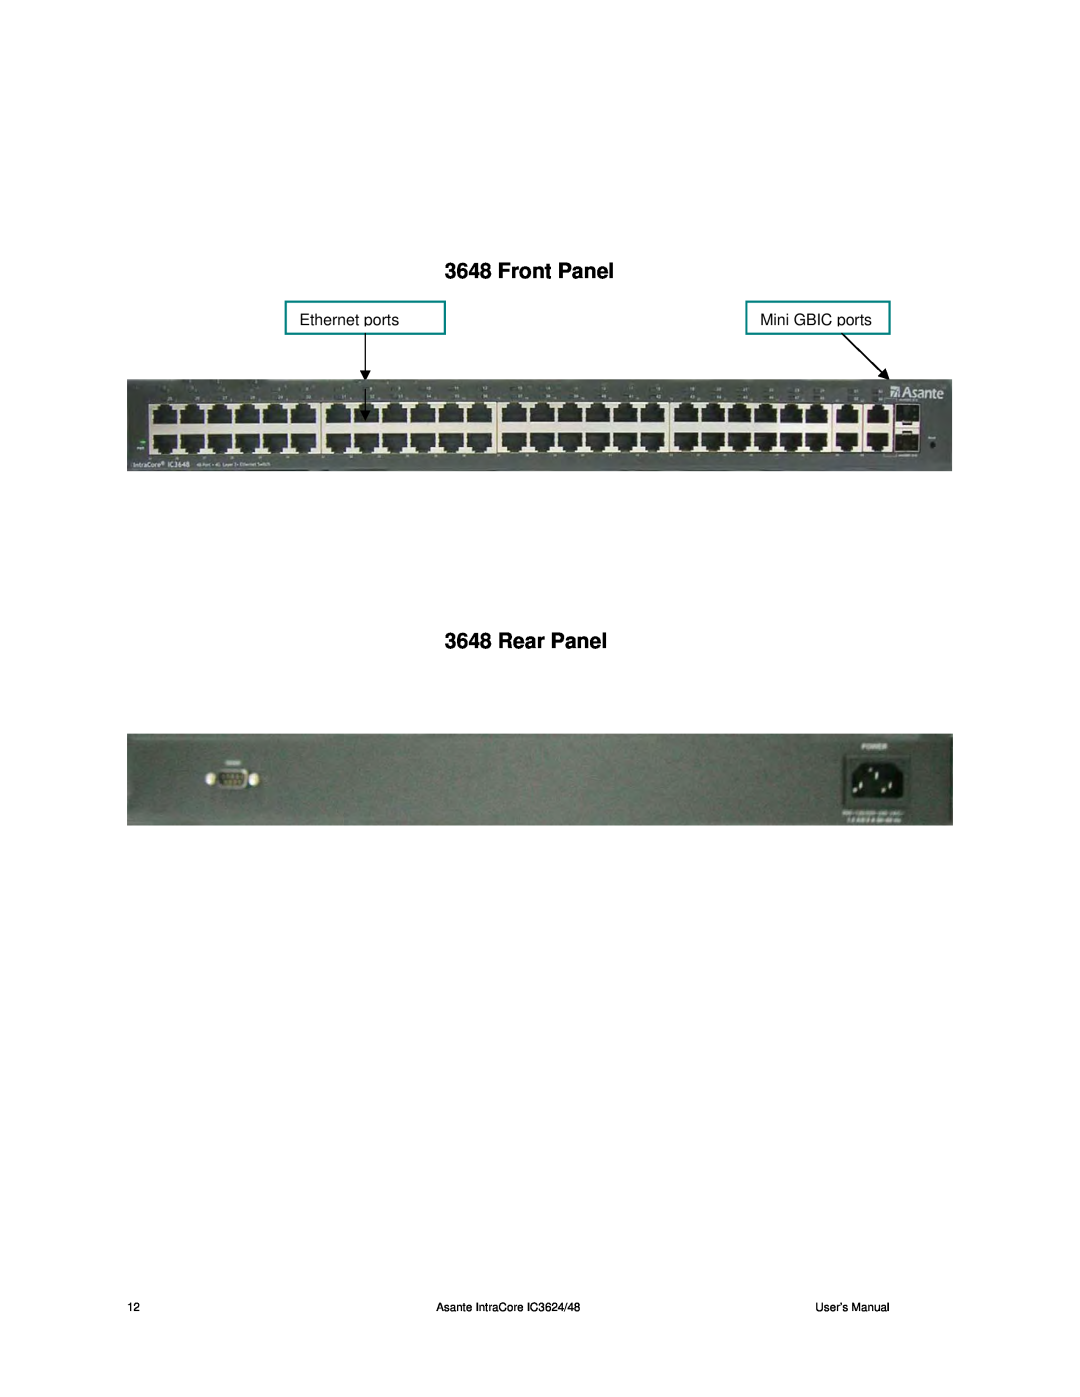 Asante Technologies Front Panel, Rear Panel, Ethernet ports, Mini GBIC ports, Asante IntraCore IC3624/48, User’s Manual 